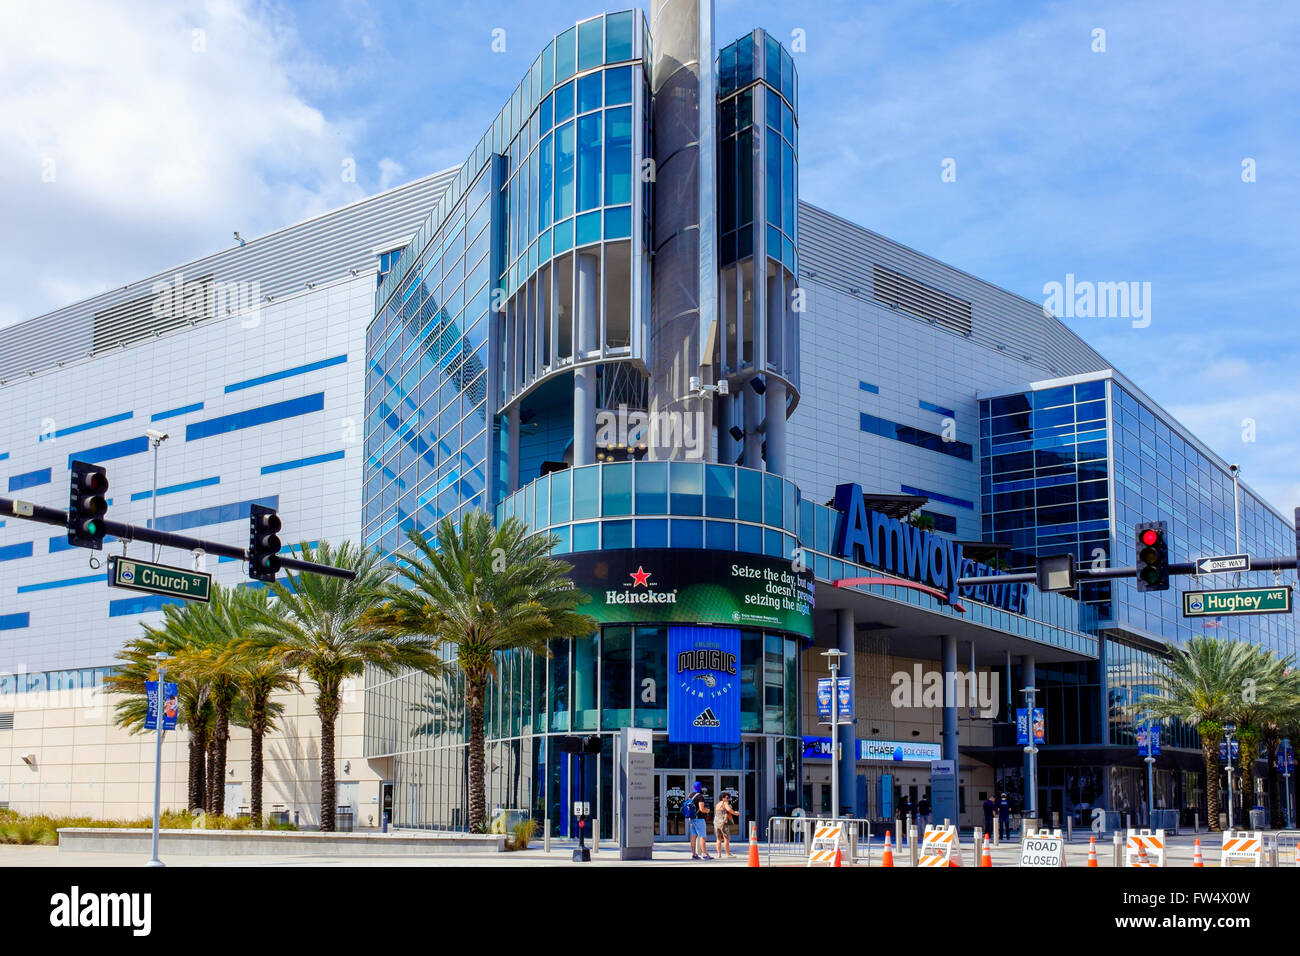 Orlando Magic Team Shop on Anway Center at Downtown Area 81. Editorial  Stock Image - Image of district, bird: 158182109